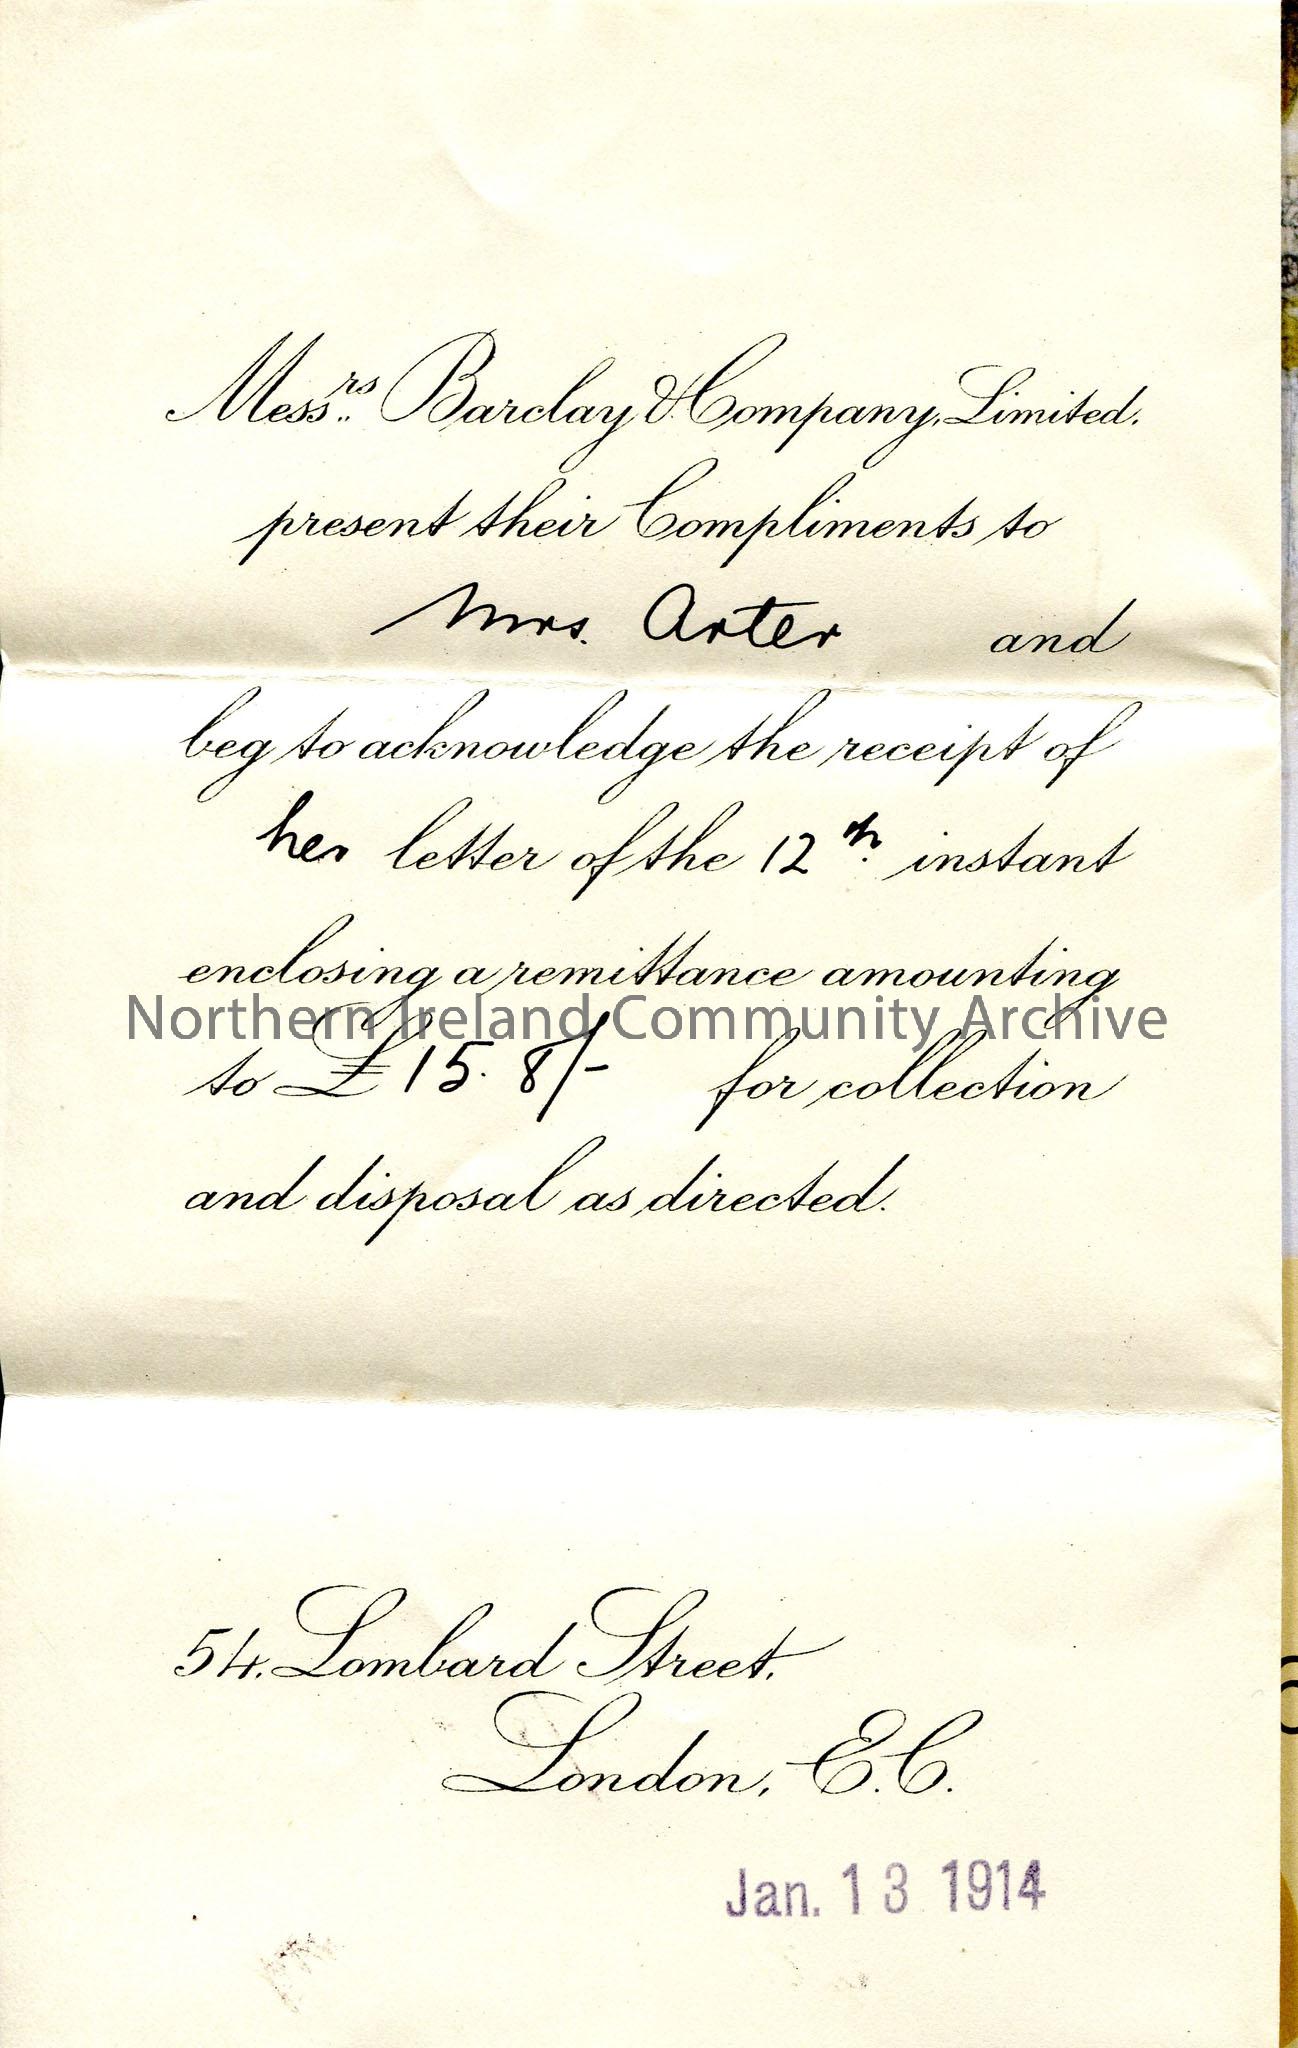 Printed receipt in form of letter, with handwritten inserts – acknowledgement of receipt of £15 8/-